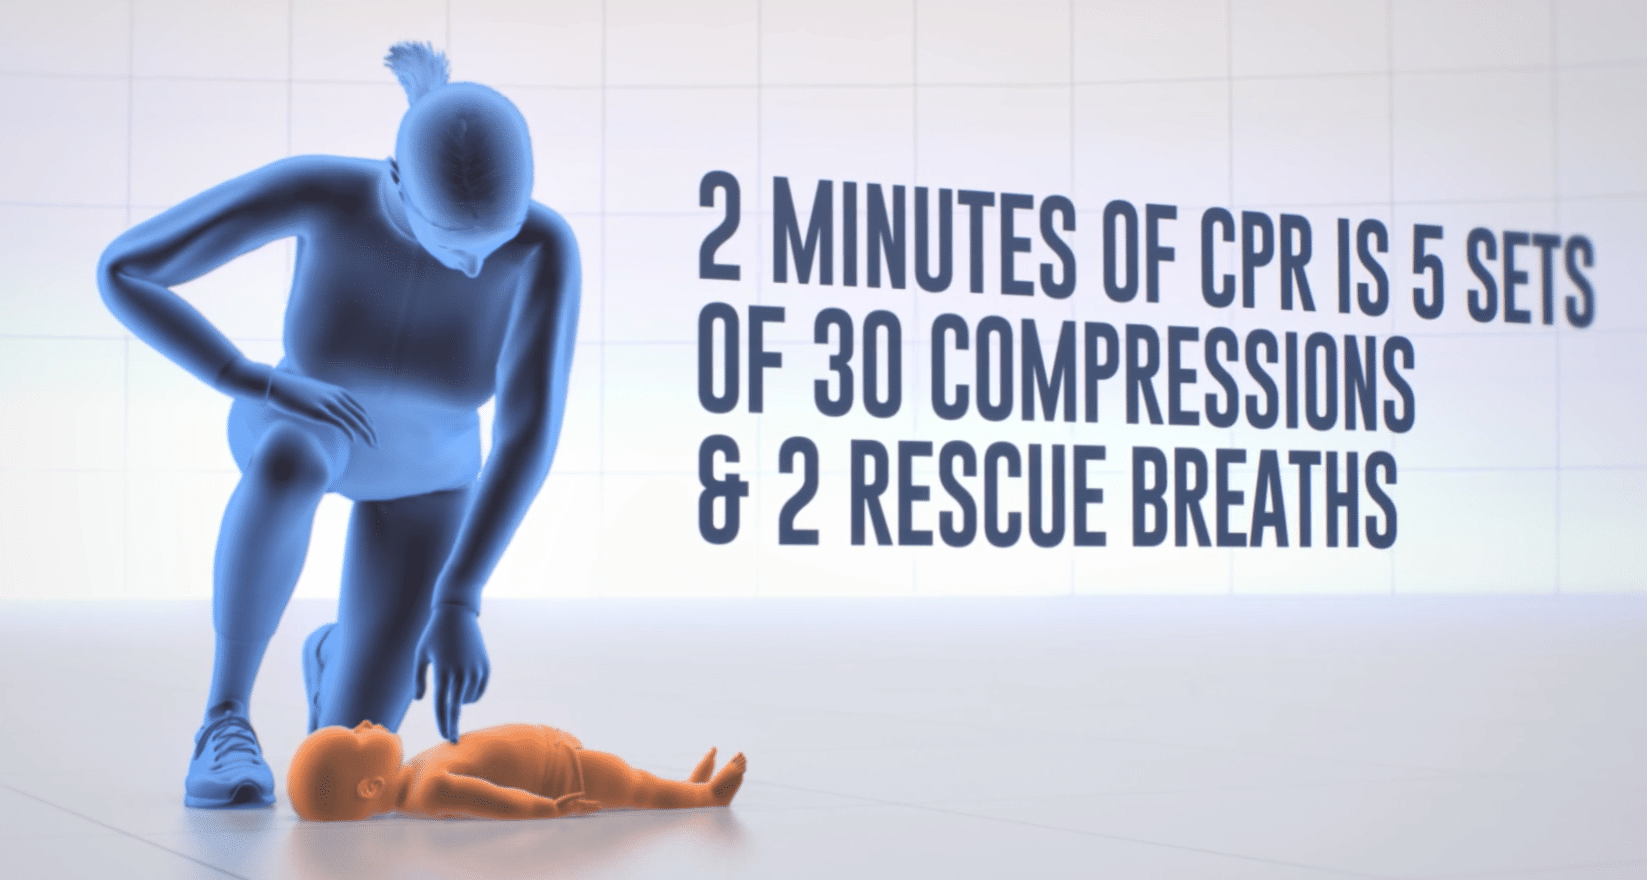 Infant CPR Repeat process